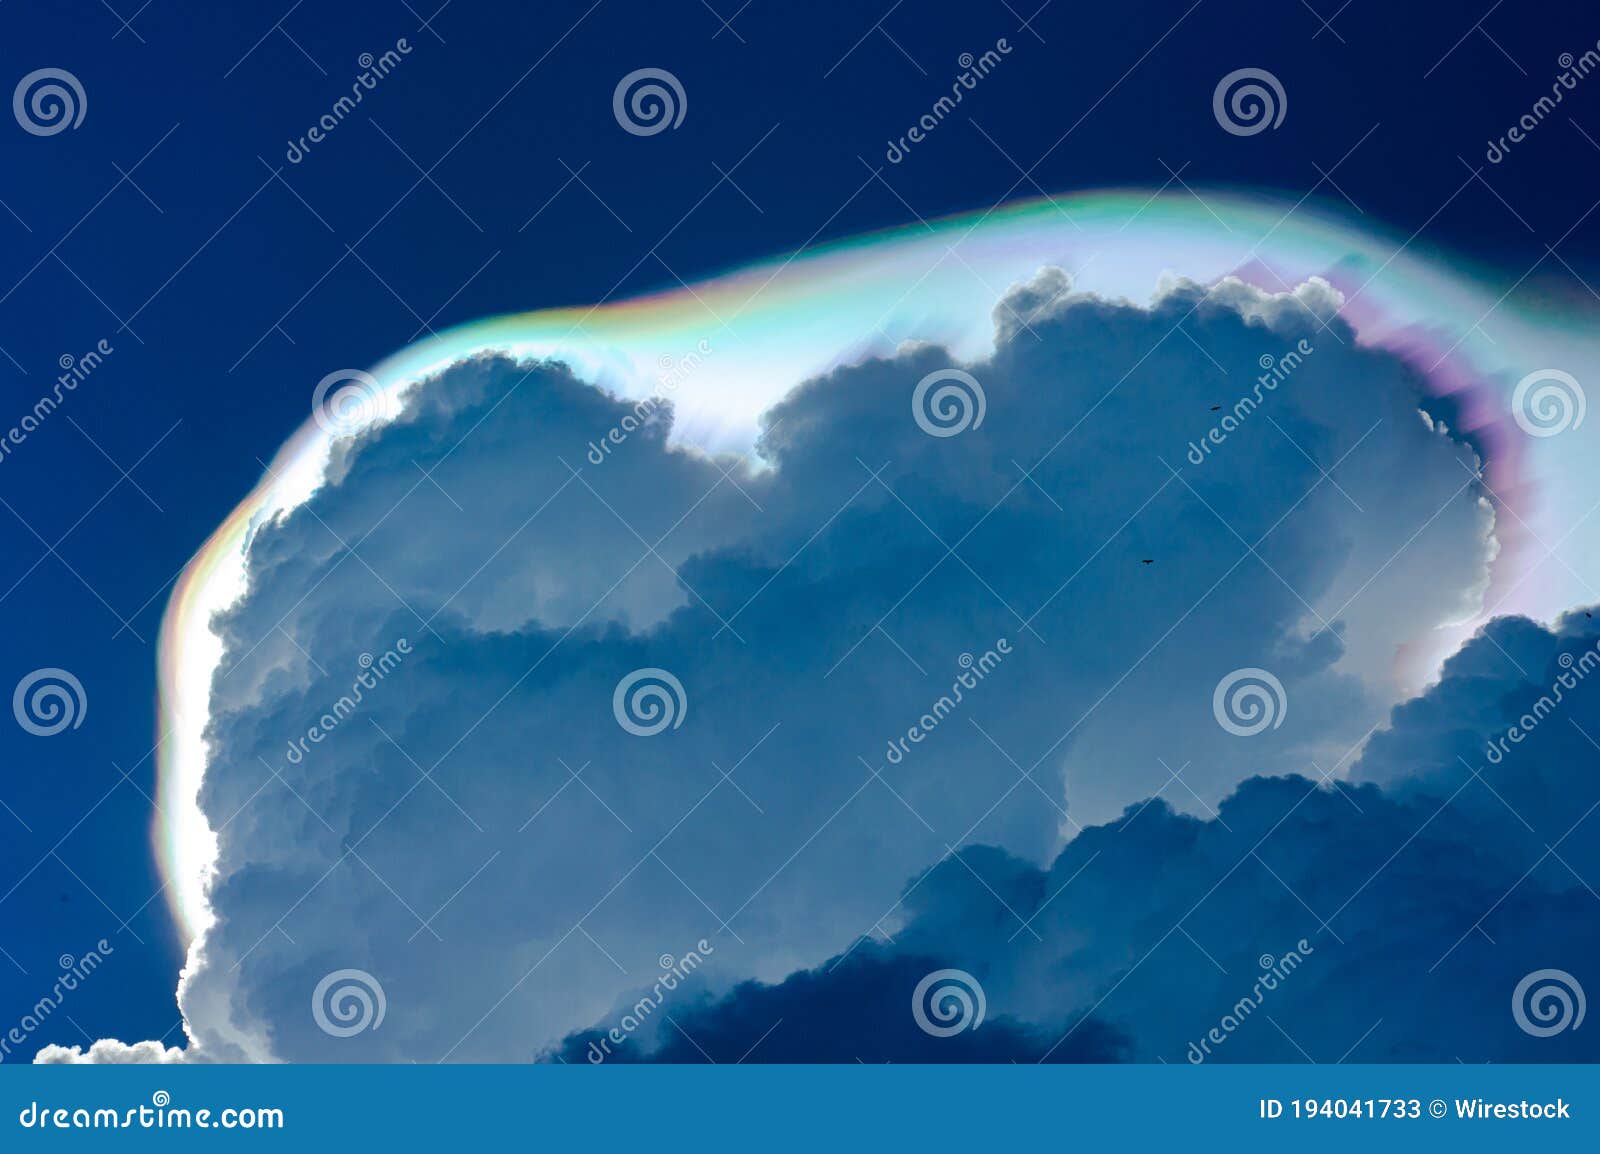 iridescents clouds in the sky 2